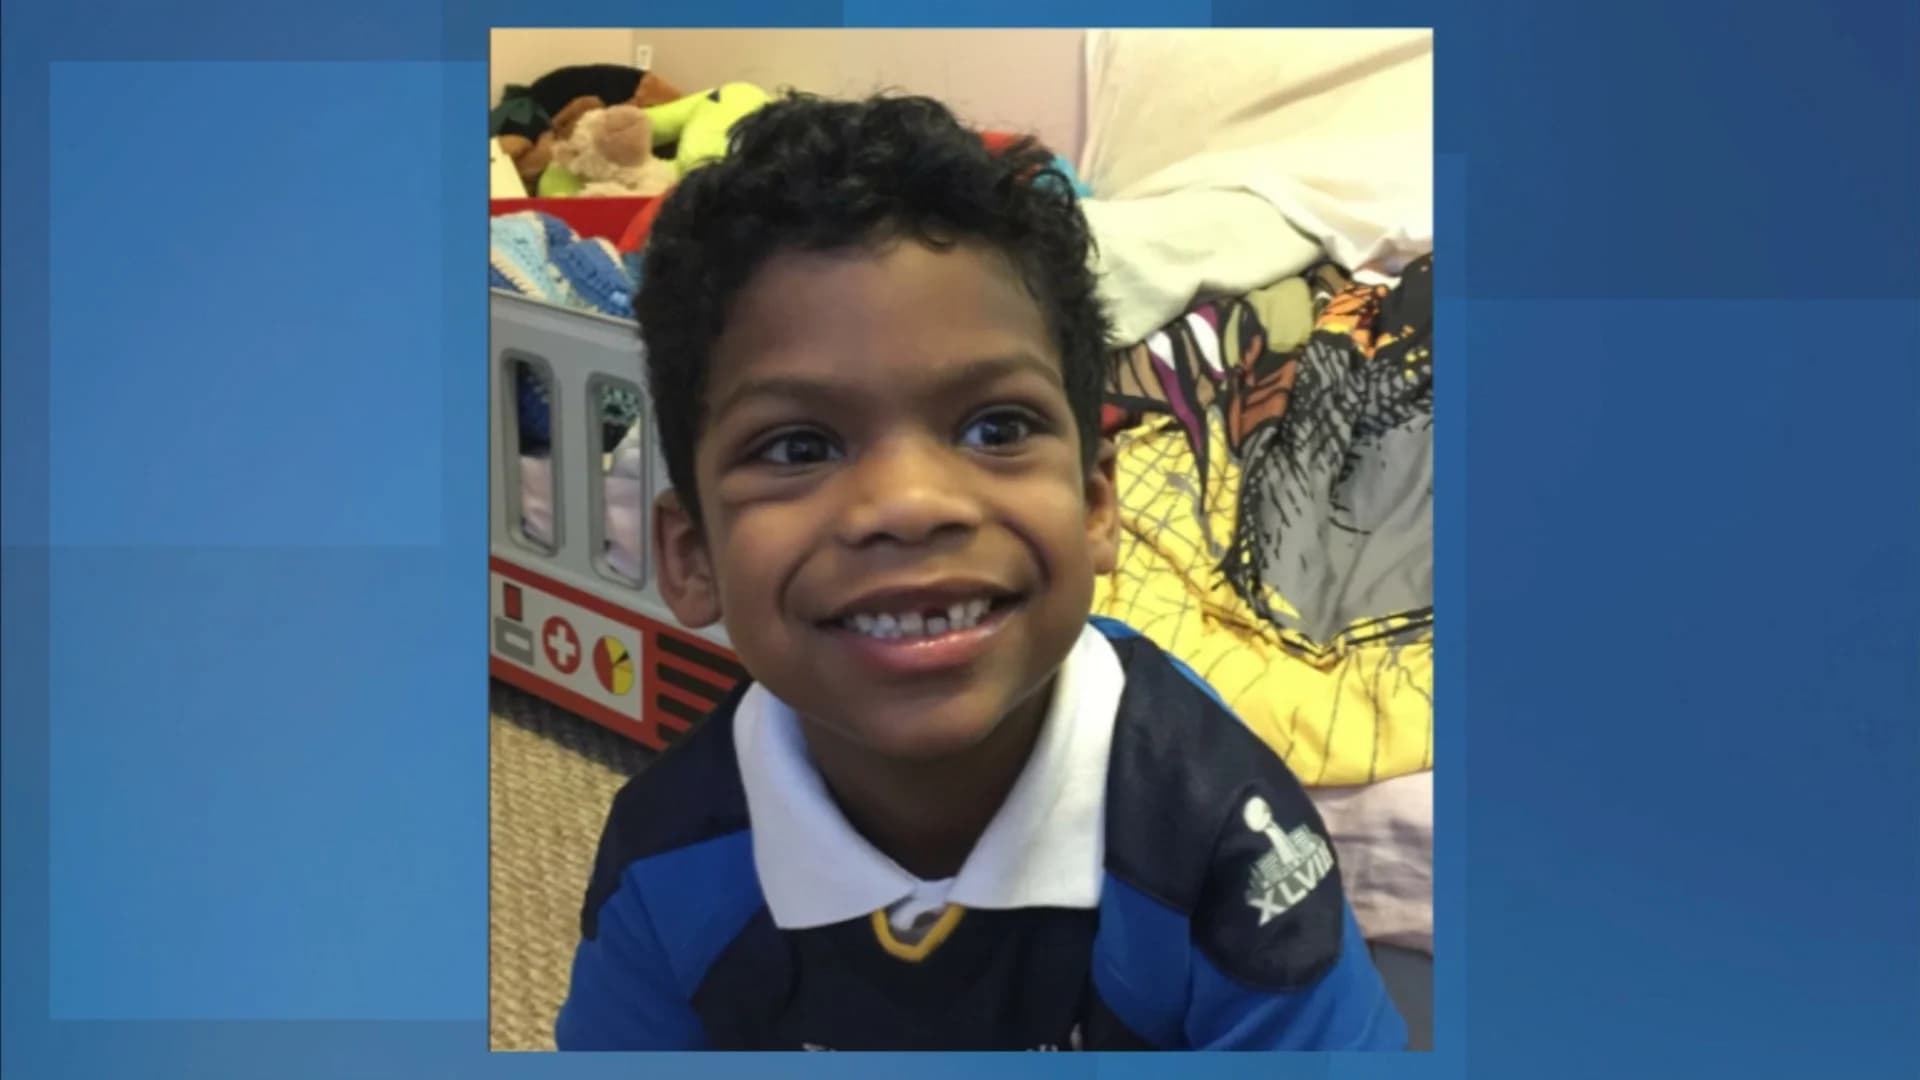 Newark boy who went missing during snowstorm found safe